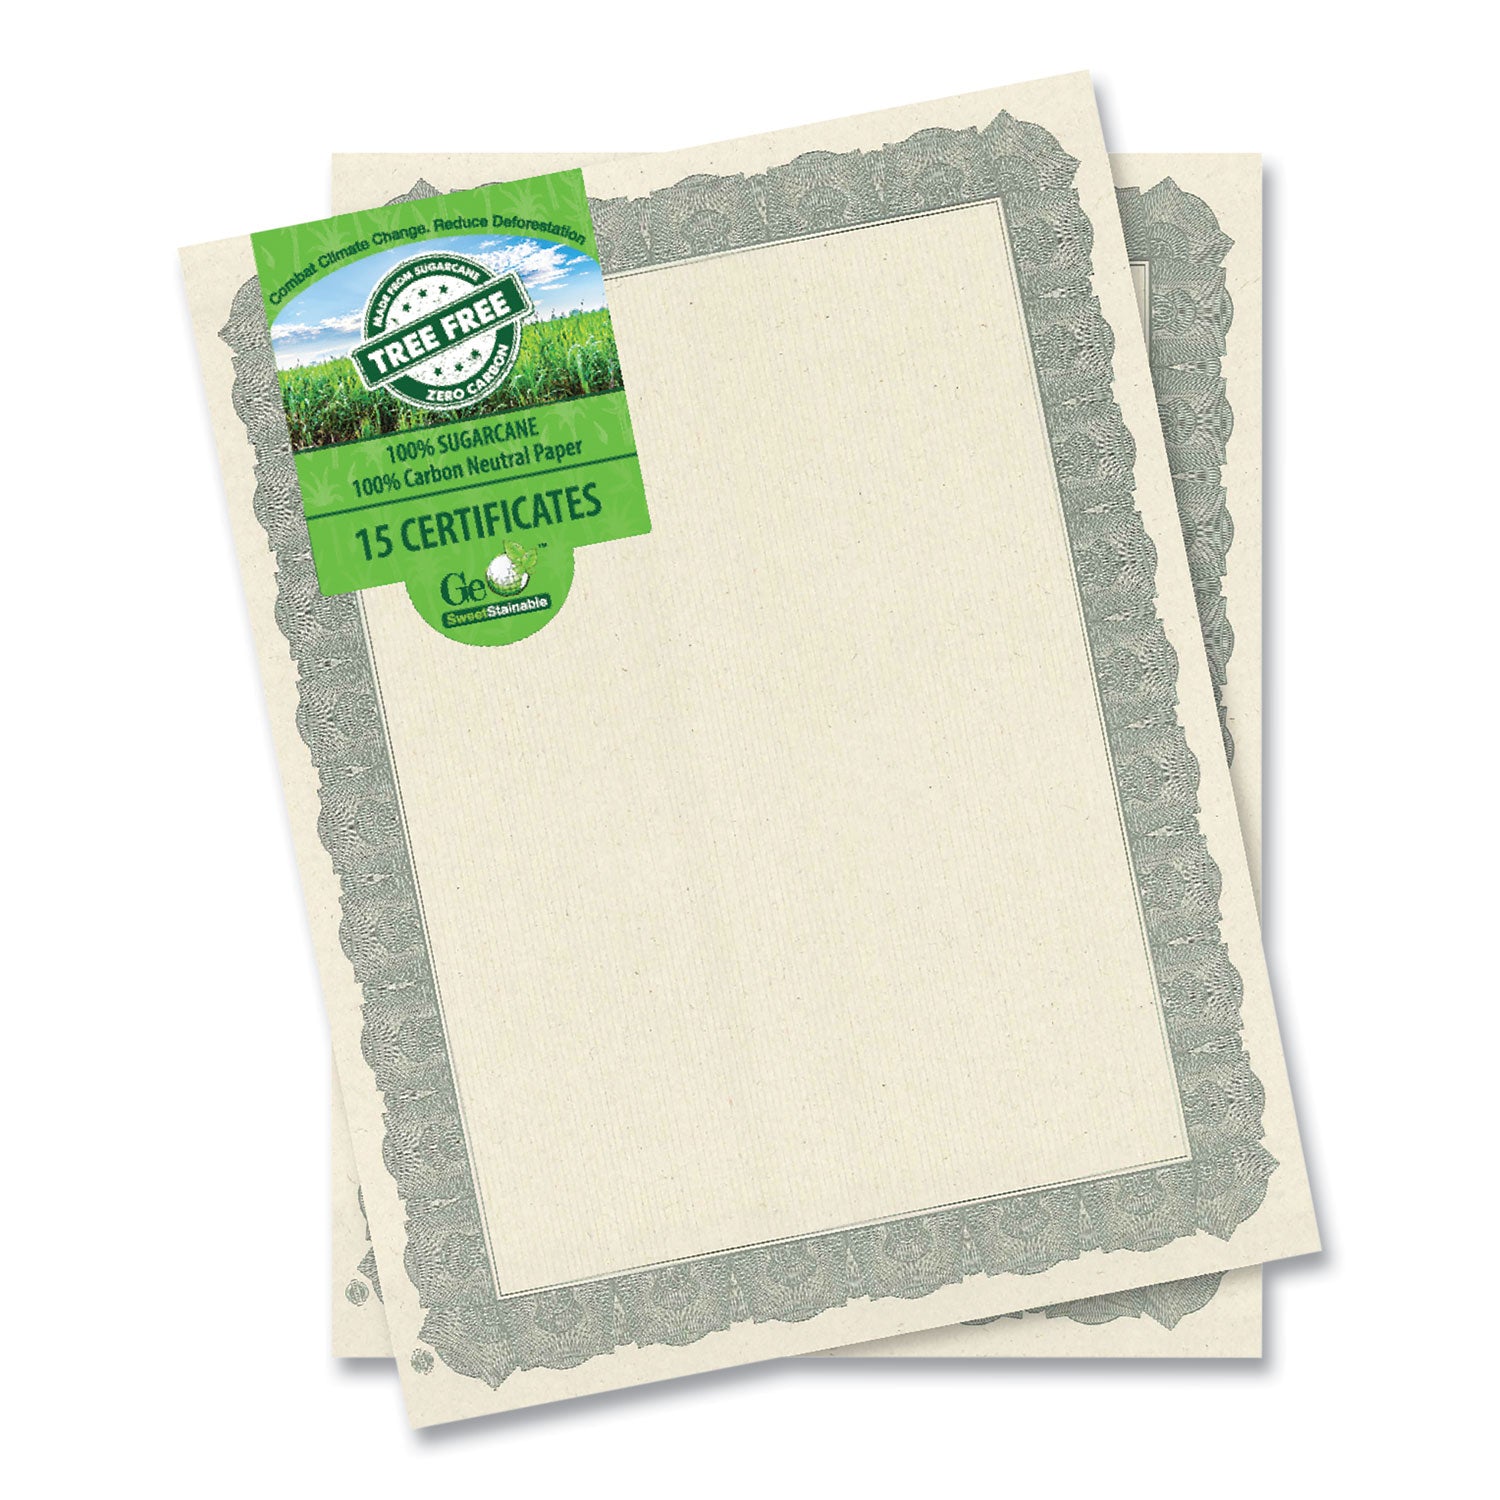 award-certificates-85-x-11-natural-with-silver-braided-border-15-pack_geo49009 - 1